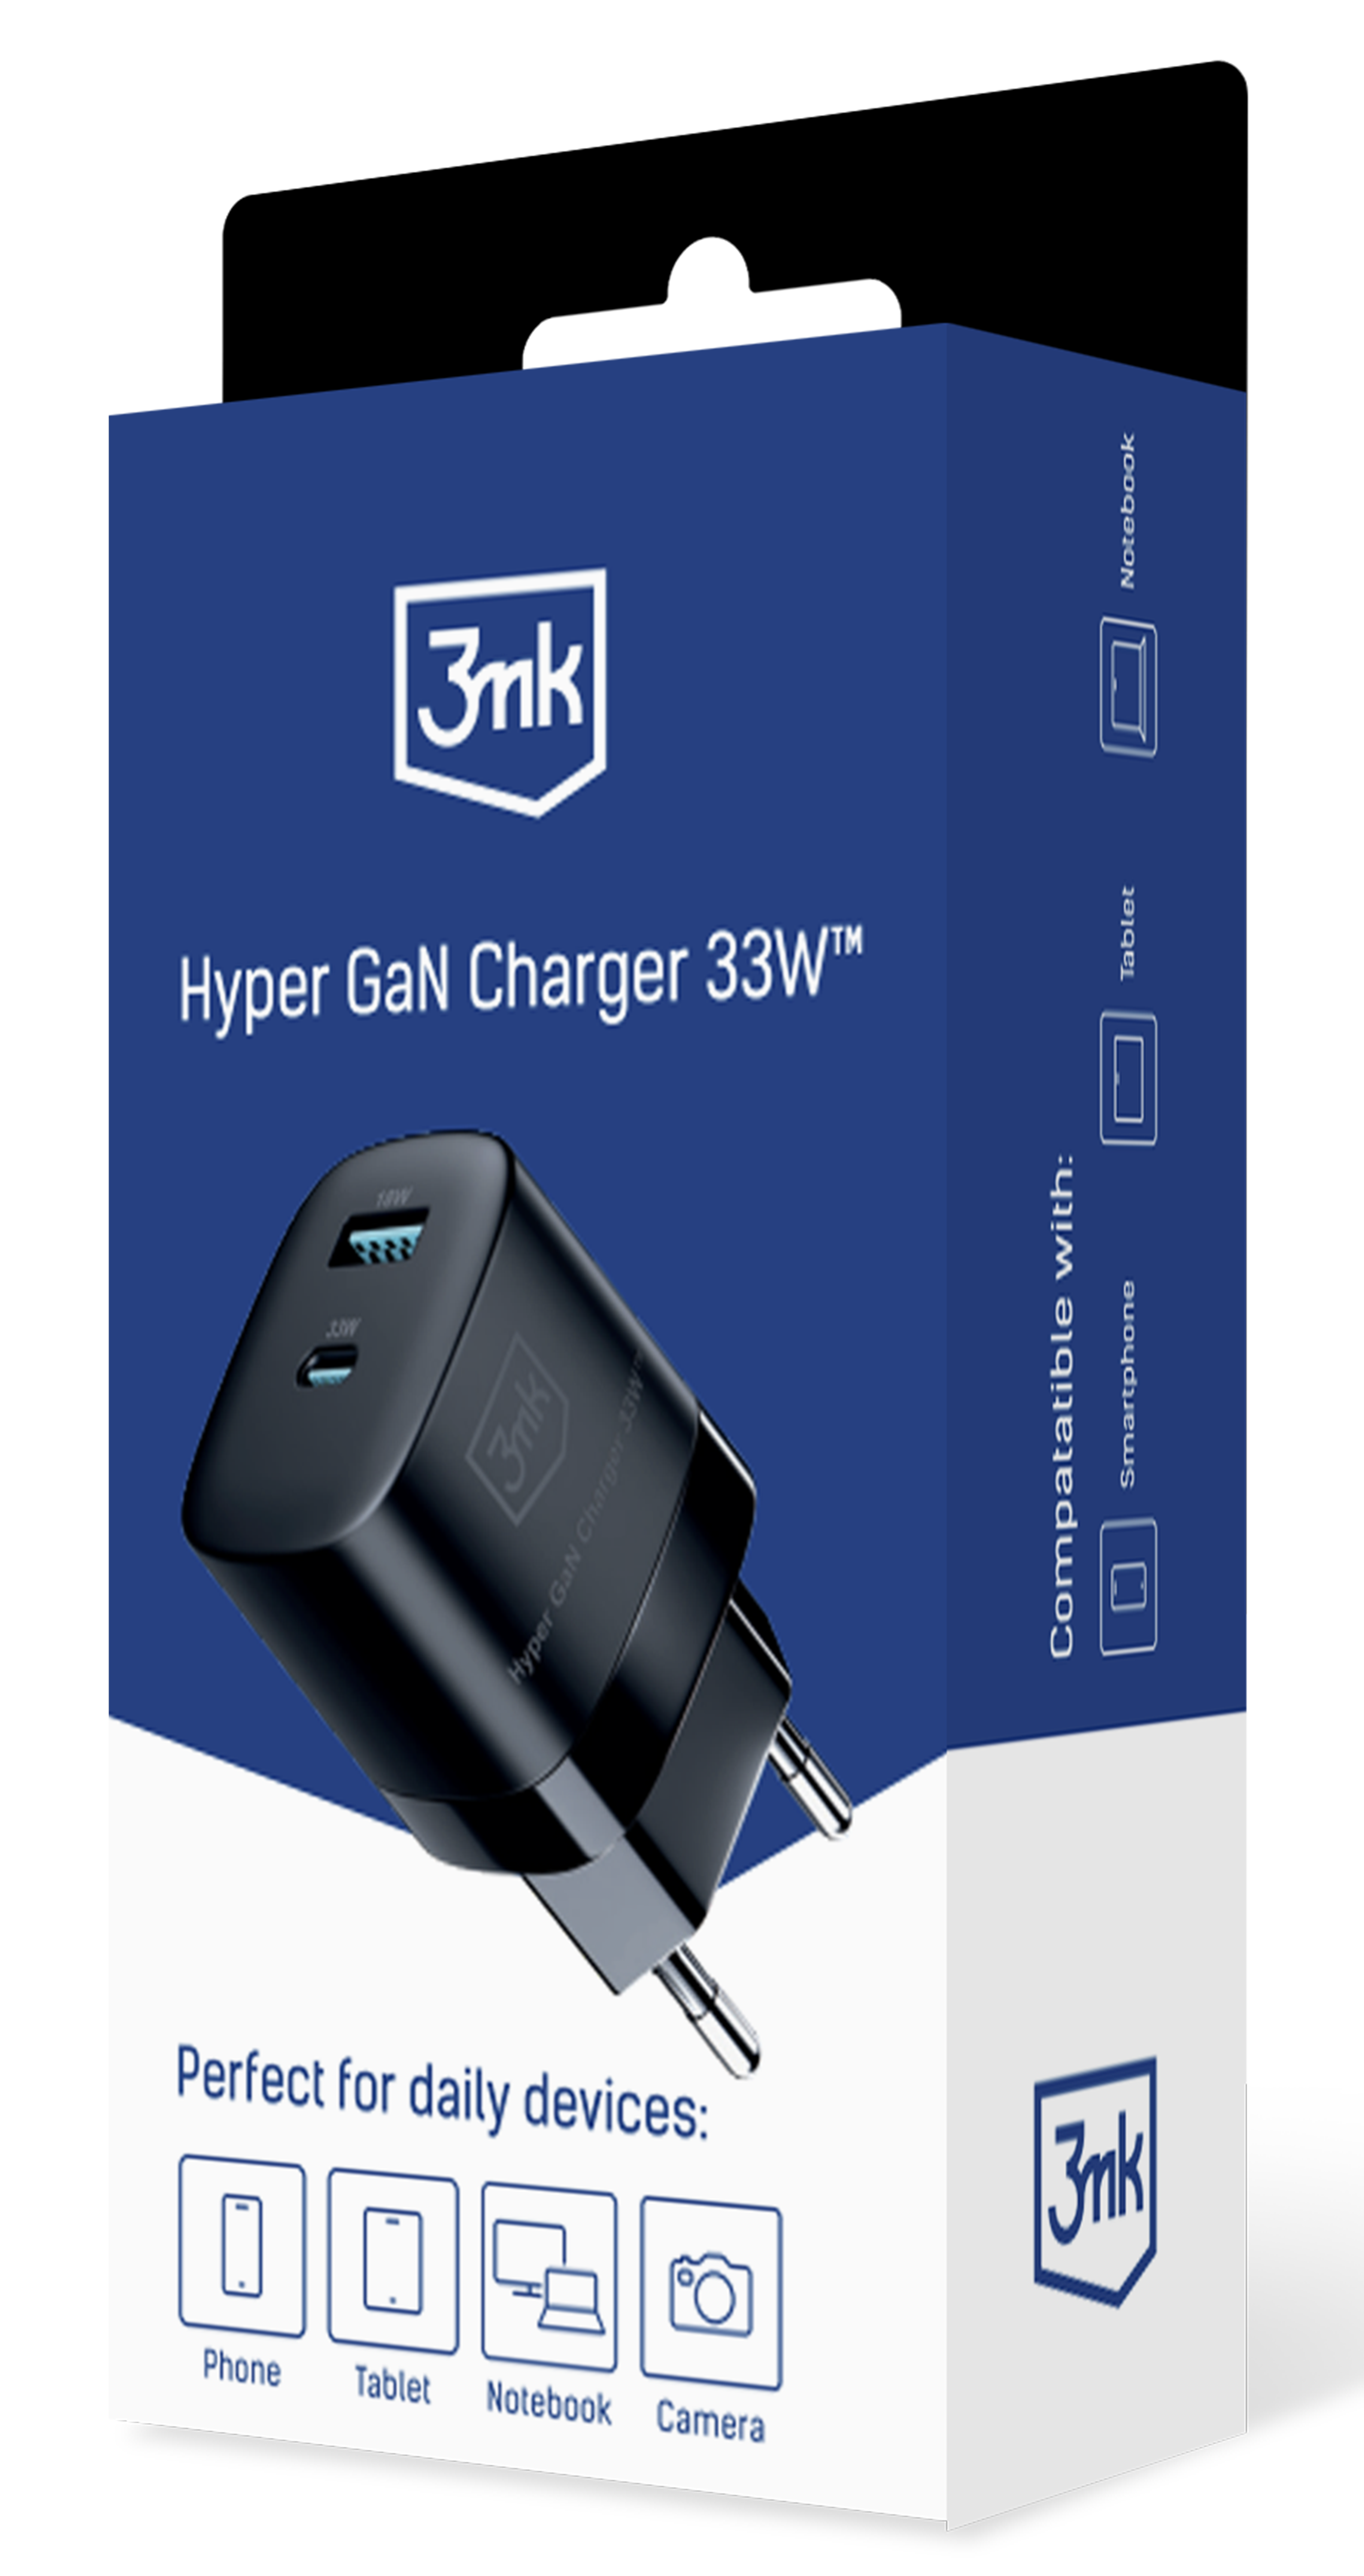 Hyper-GaN-Charger-33W_-landing-page-11-1